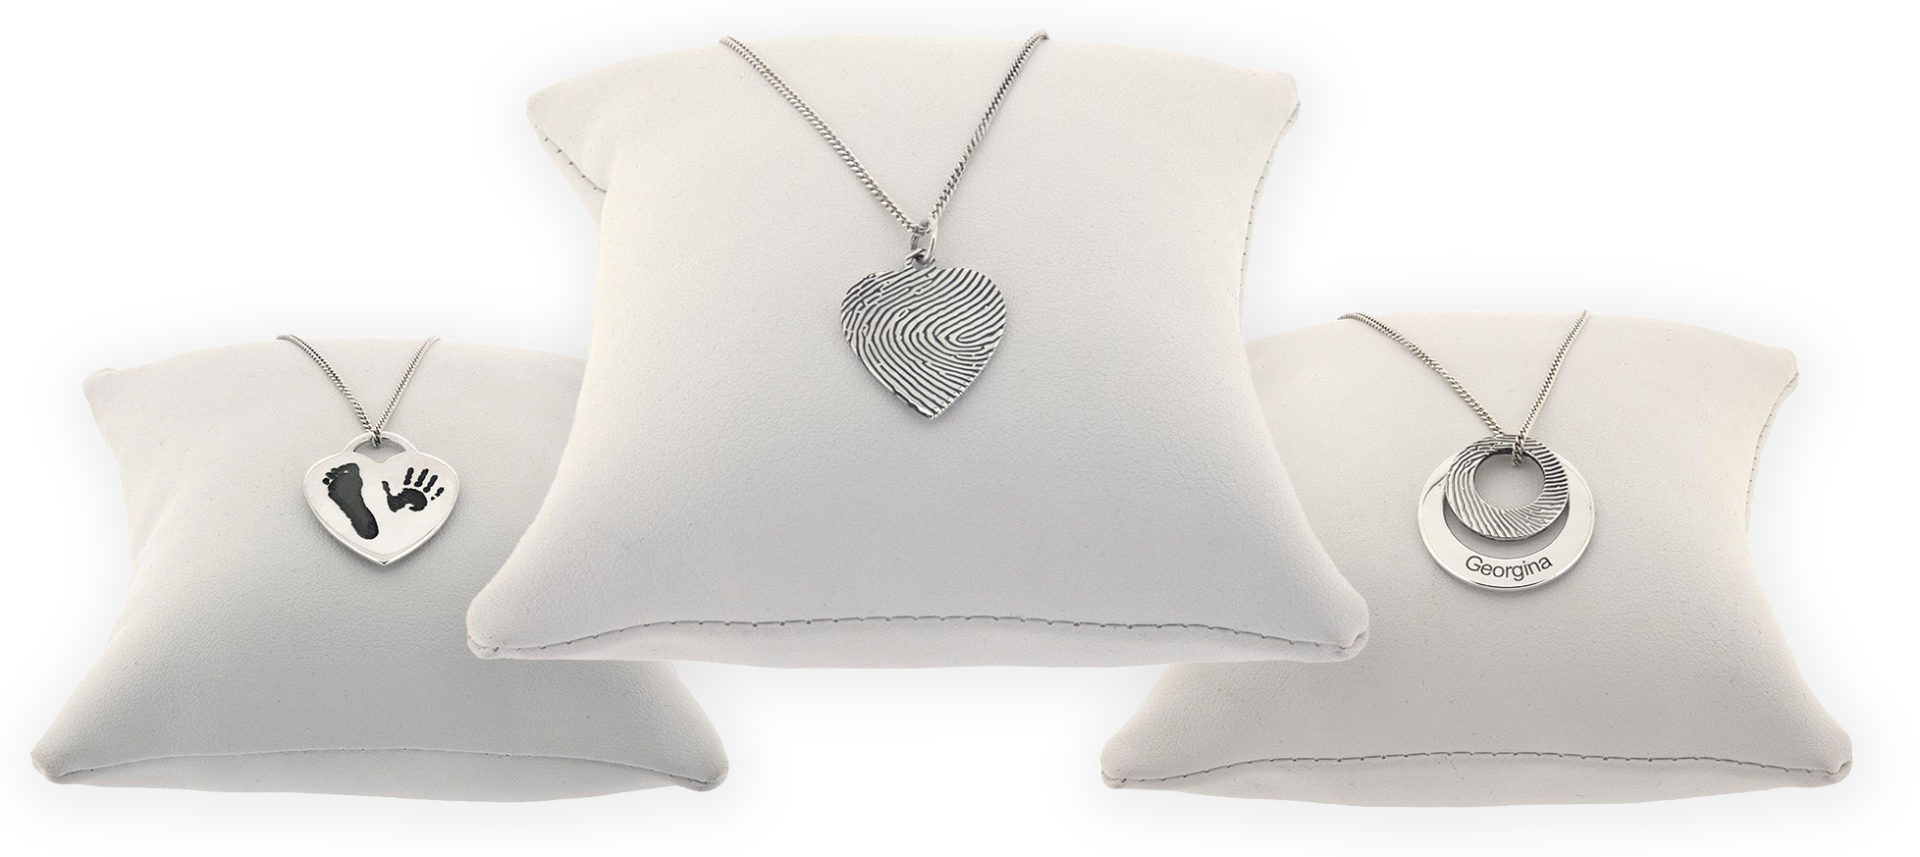 Personalised jewellery | Silver fingerprint necklaces